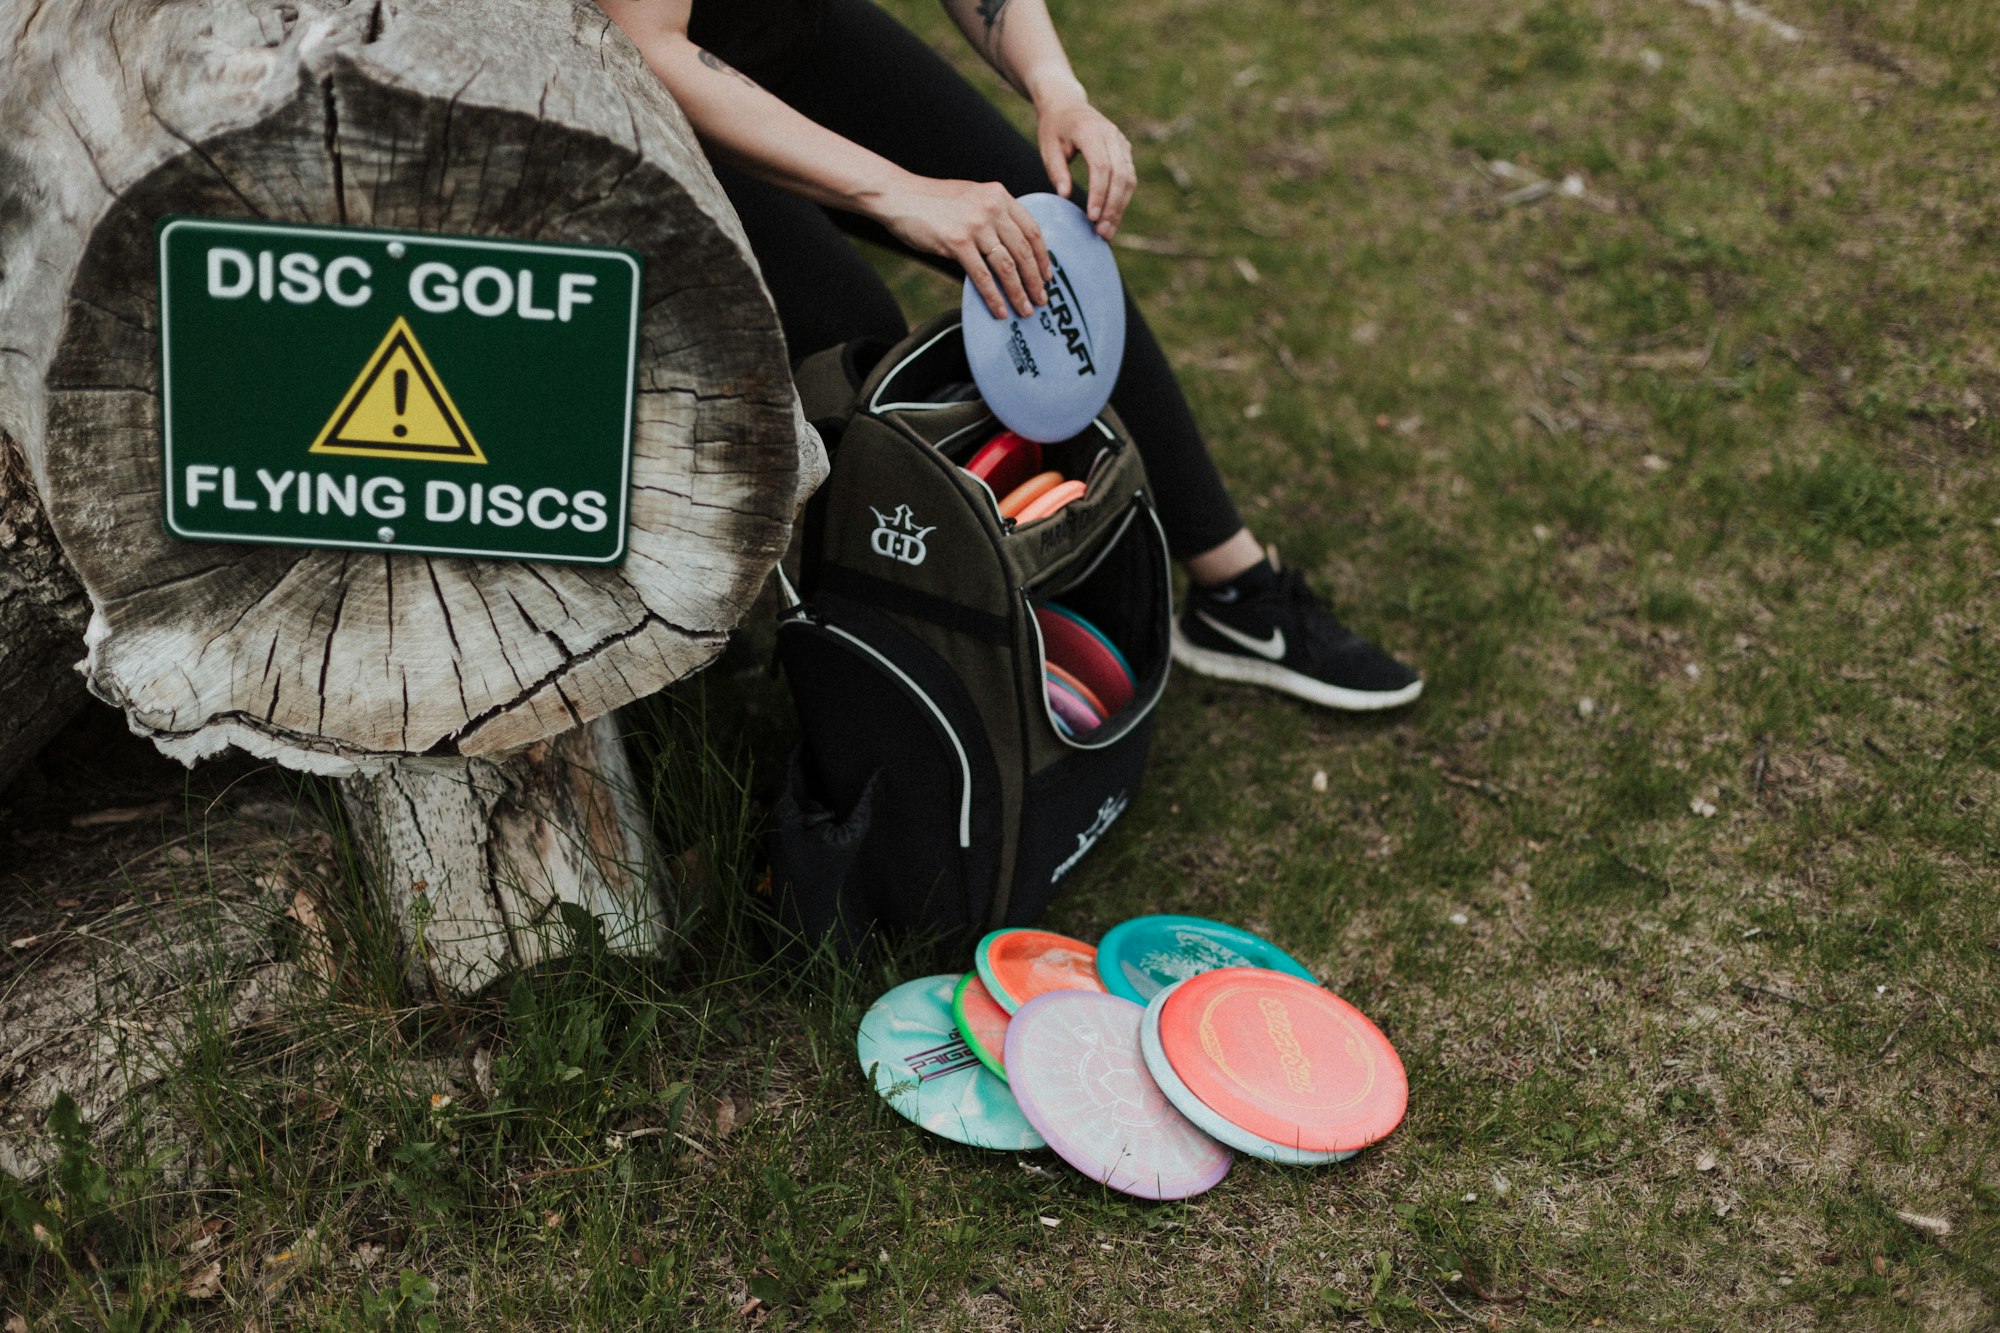 Disc golfer holding a disc golf bag with disc golf discs in it